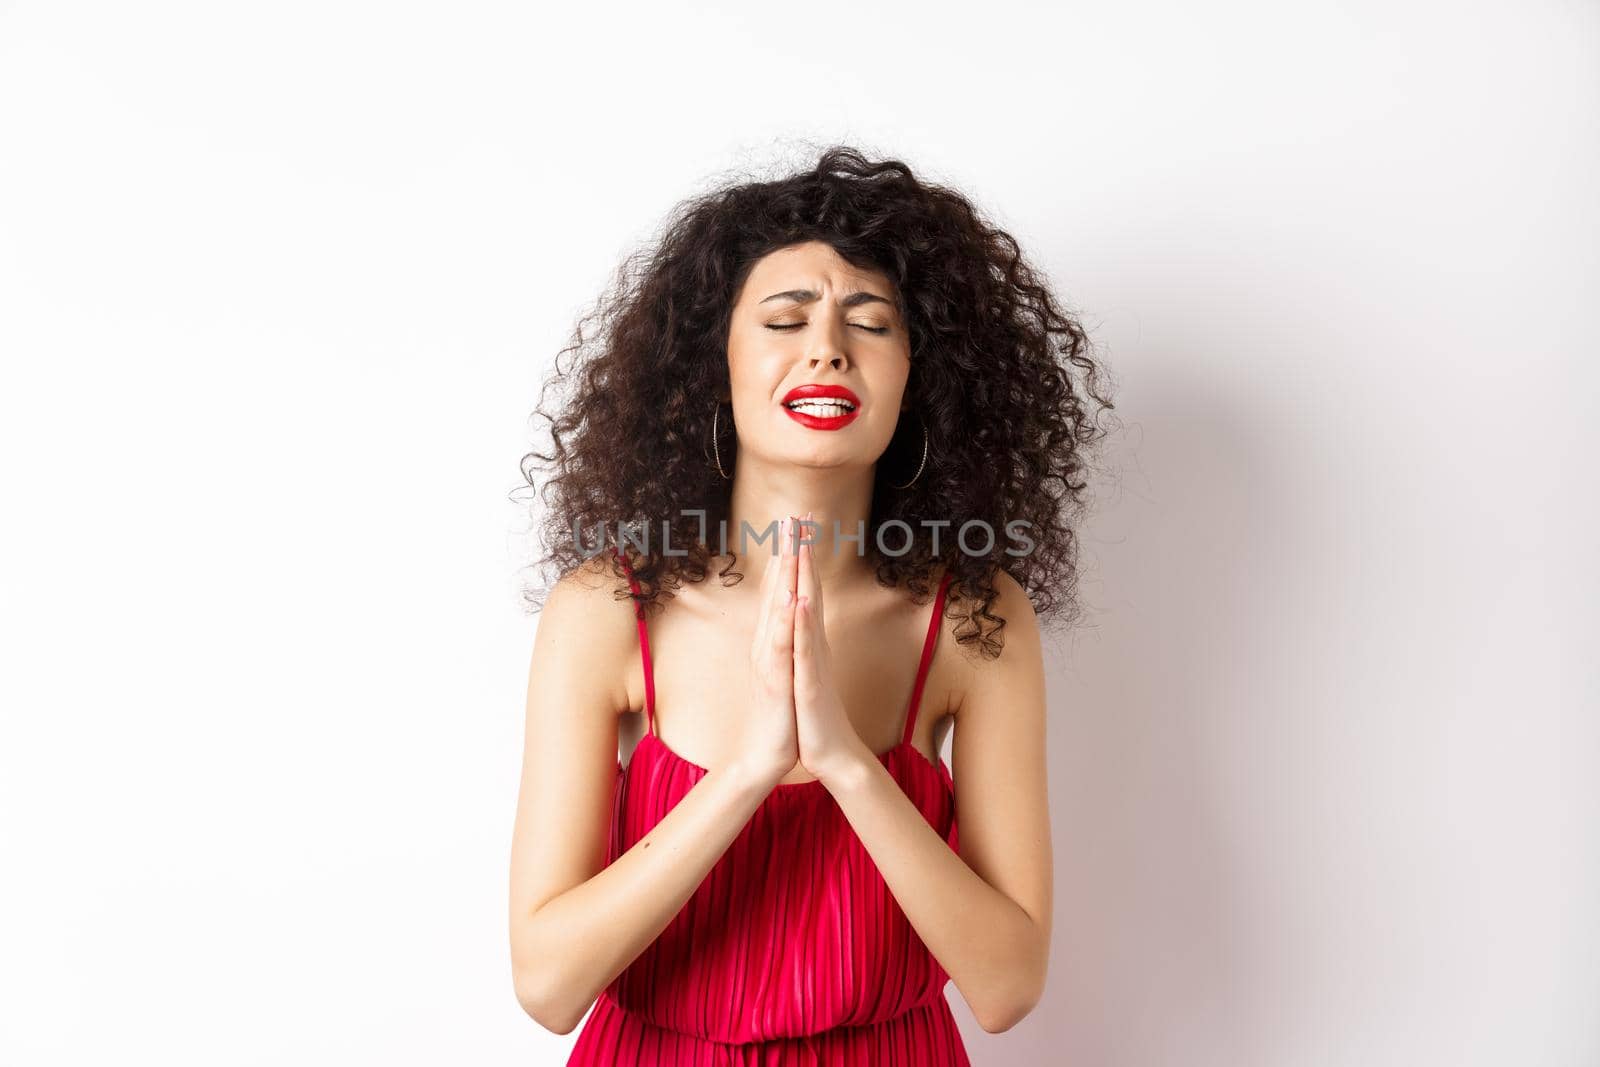 Desperate young woman in red dress begging for help, pleading and looking miserable, supplicating over white background. Copy space